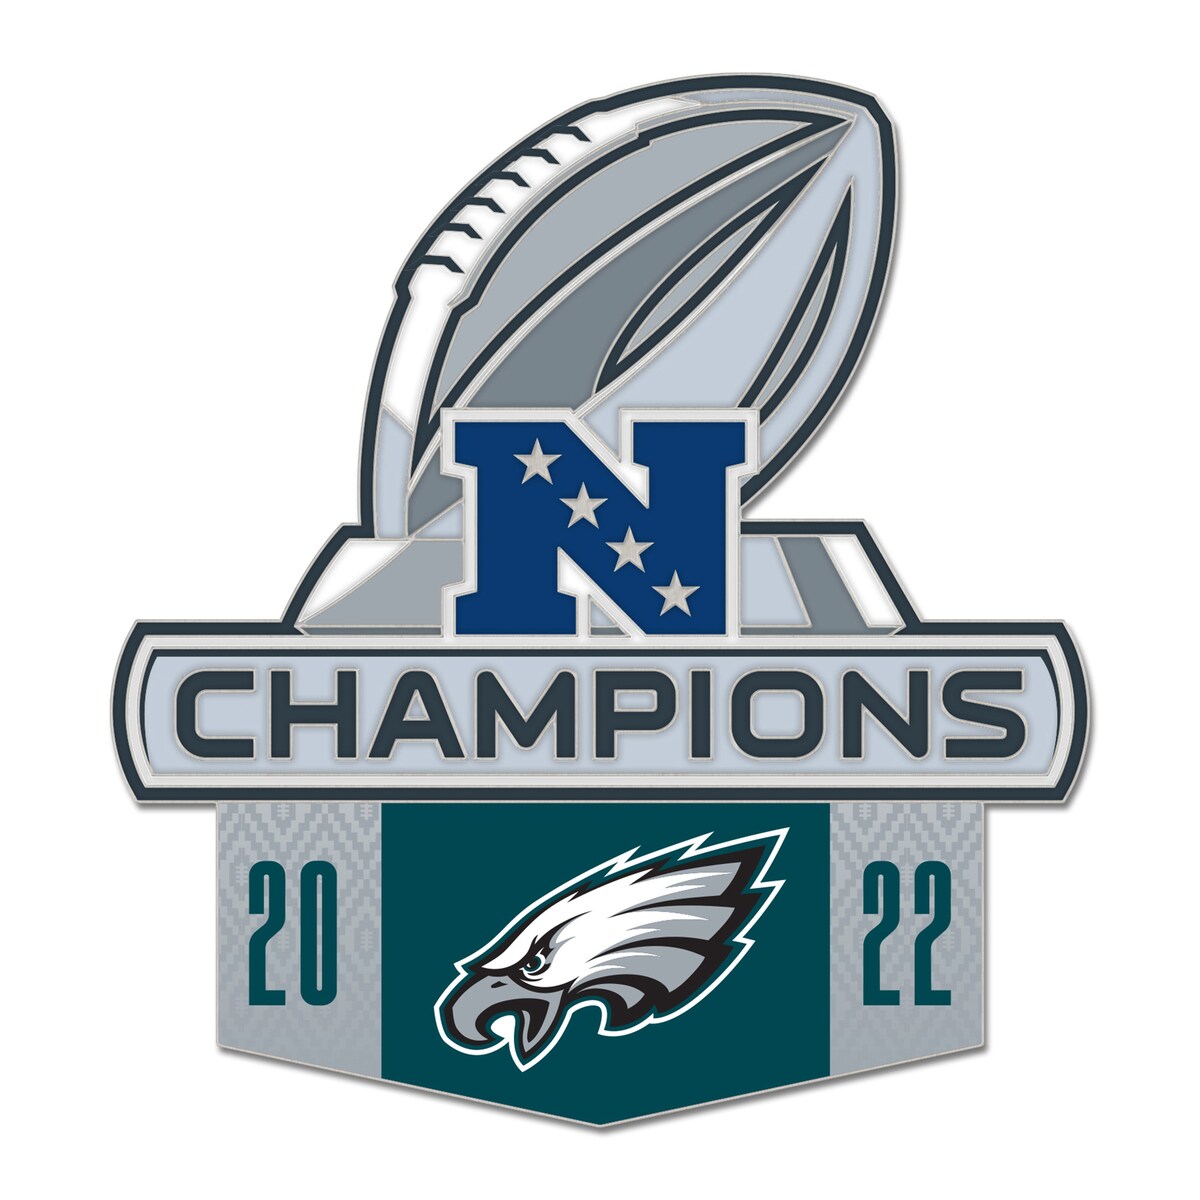 The 2022 NFL season was an electrifying ride, and the excitement continues on the road to Super Bowl LVII! Celebrate a crucial Philadelphia Eagles victory by grabbing this 2022 NFC Champions Collector's Pin from WinCraft. It features commemorative graphics that will showcase your unwavering support for the Philadelphia Eagles in the Super Bowl and beyond.Measures approx. 1.25'' x .06'' x 1.75''ImportedBrand: WinCraftHard enameled graphicsOfficially licensedMaterial: 100% Metal